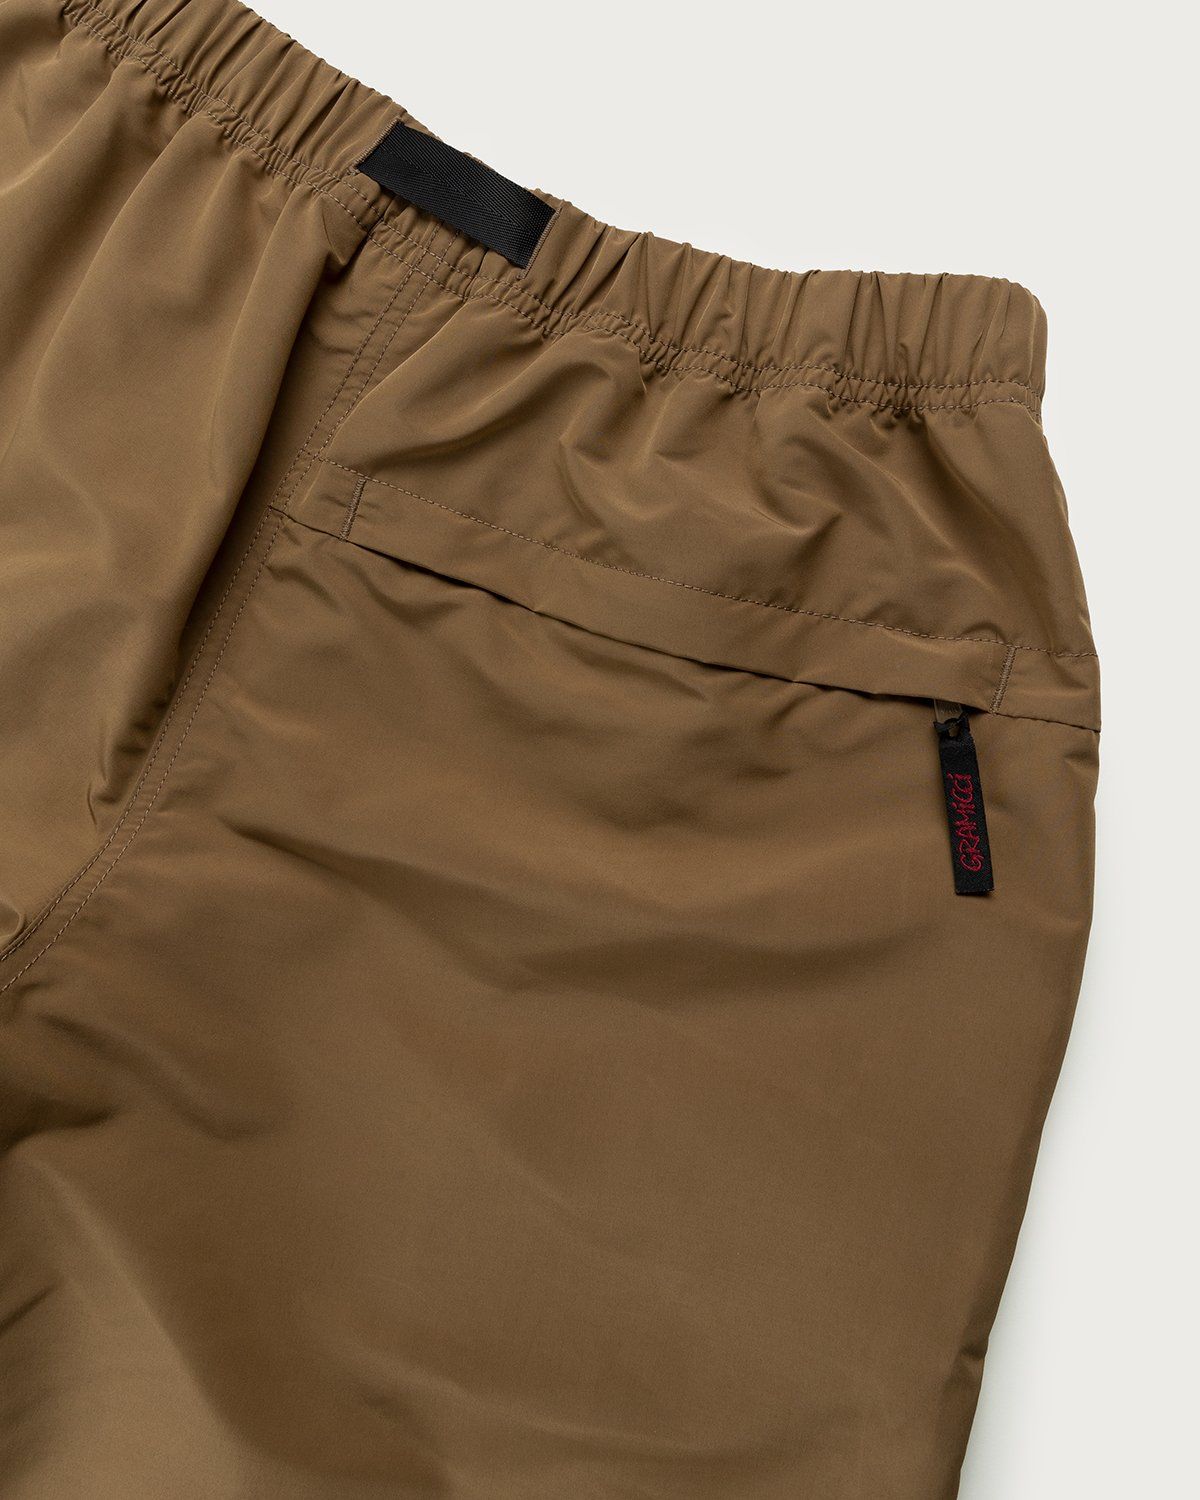 Gramicci x Highsnobiety – HS Sports Shell Packable Shorts Tan - Active Shorts - Brown - Image 3